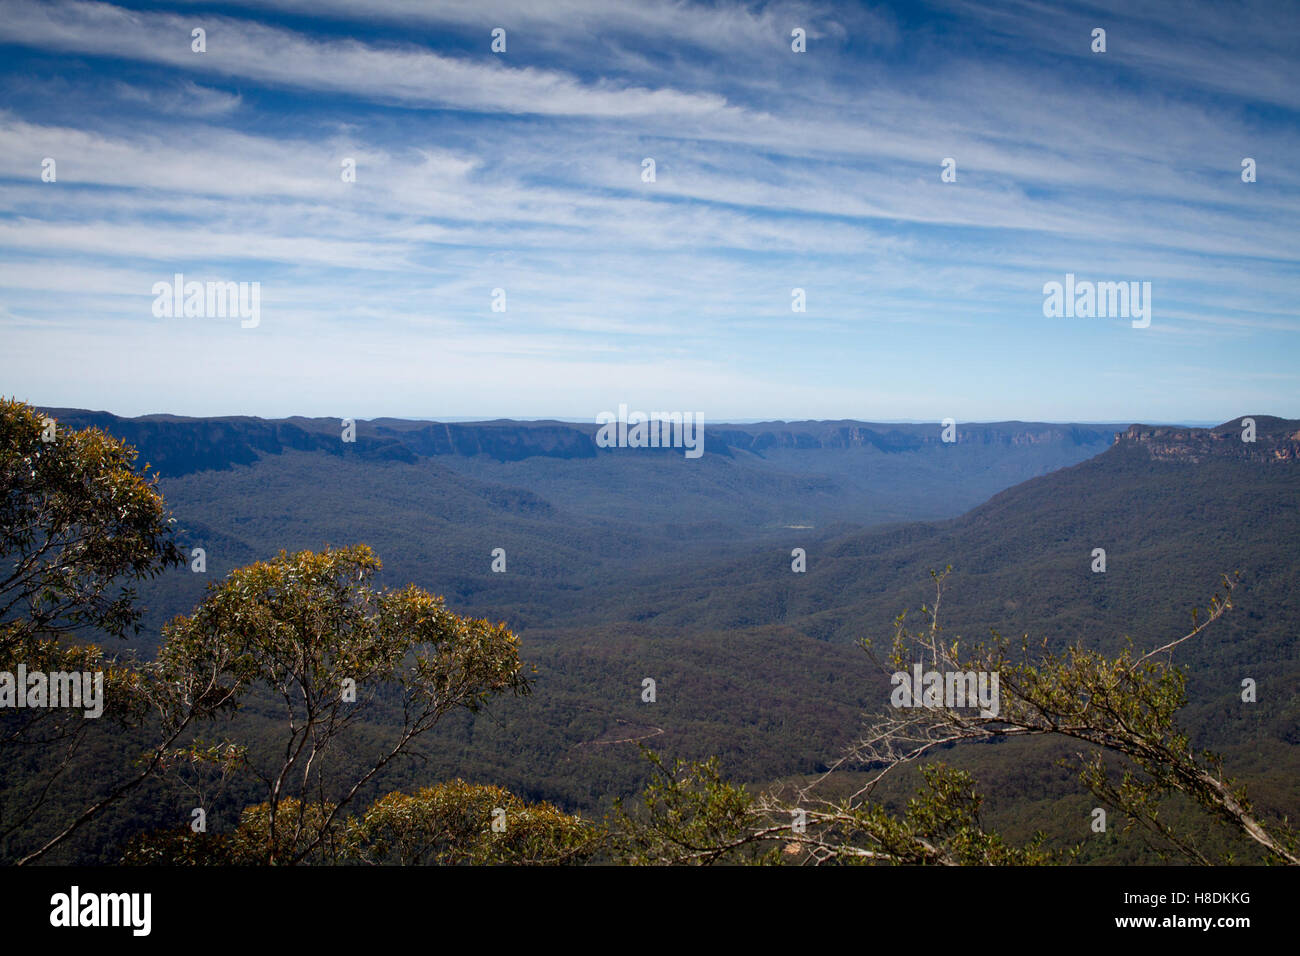 (161111) -- SYDNEY, Nov. 11, 2016 (Xinhua) -- Photo taken on Oct. 25, 2016 shows the Blue Mountains National Park in New South Wales state, Australia. Four percent of Australia's continent is protected for conservation, encompassed within just over 500 national parks, or some 28 million hectares of land. Most national parks are managed by Australia's state and territory governments -- states are responsible for land management under Australia's constitution -- though the Commonwealth Government looks after six national parks, the National Botanic Gardens and 58 individual marine reserves. (Xin Stock Photo